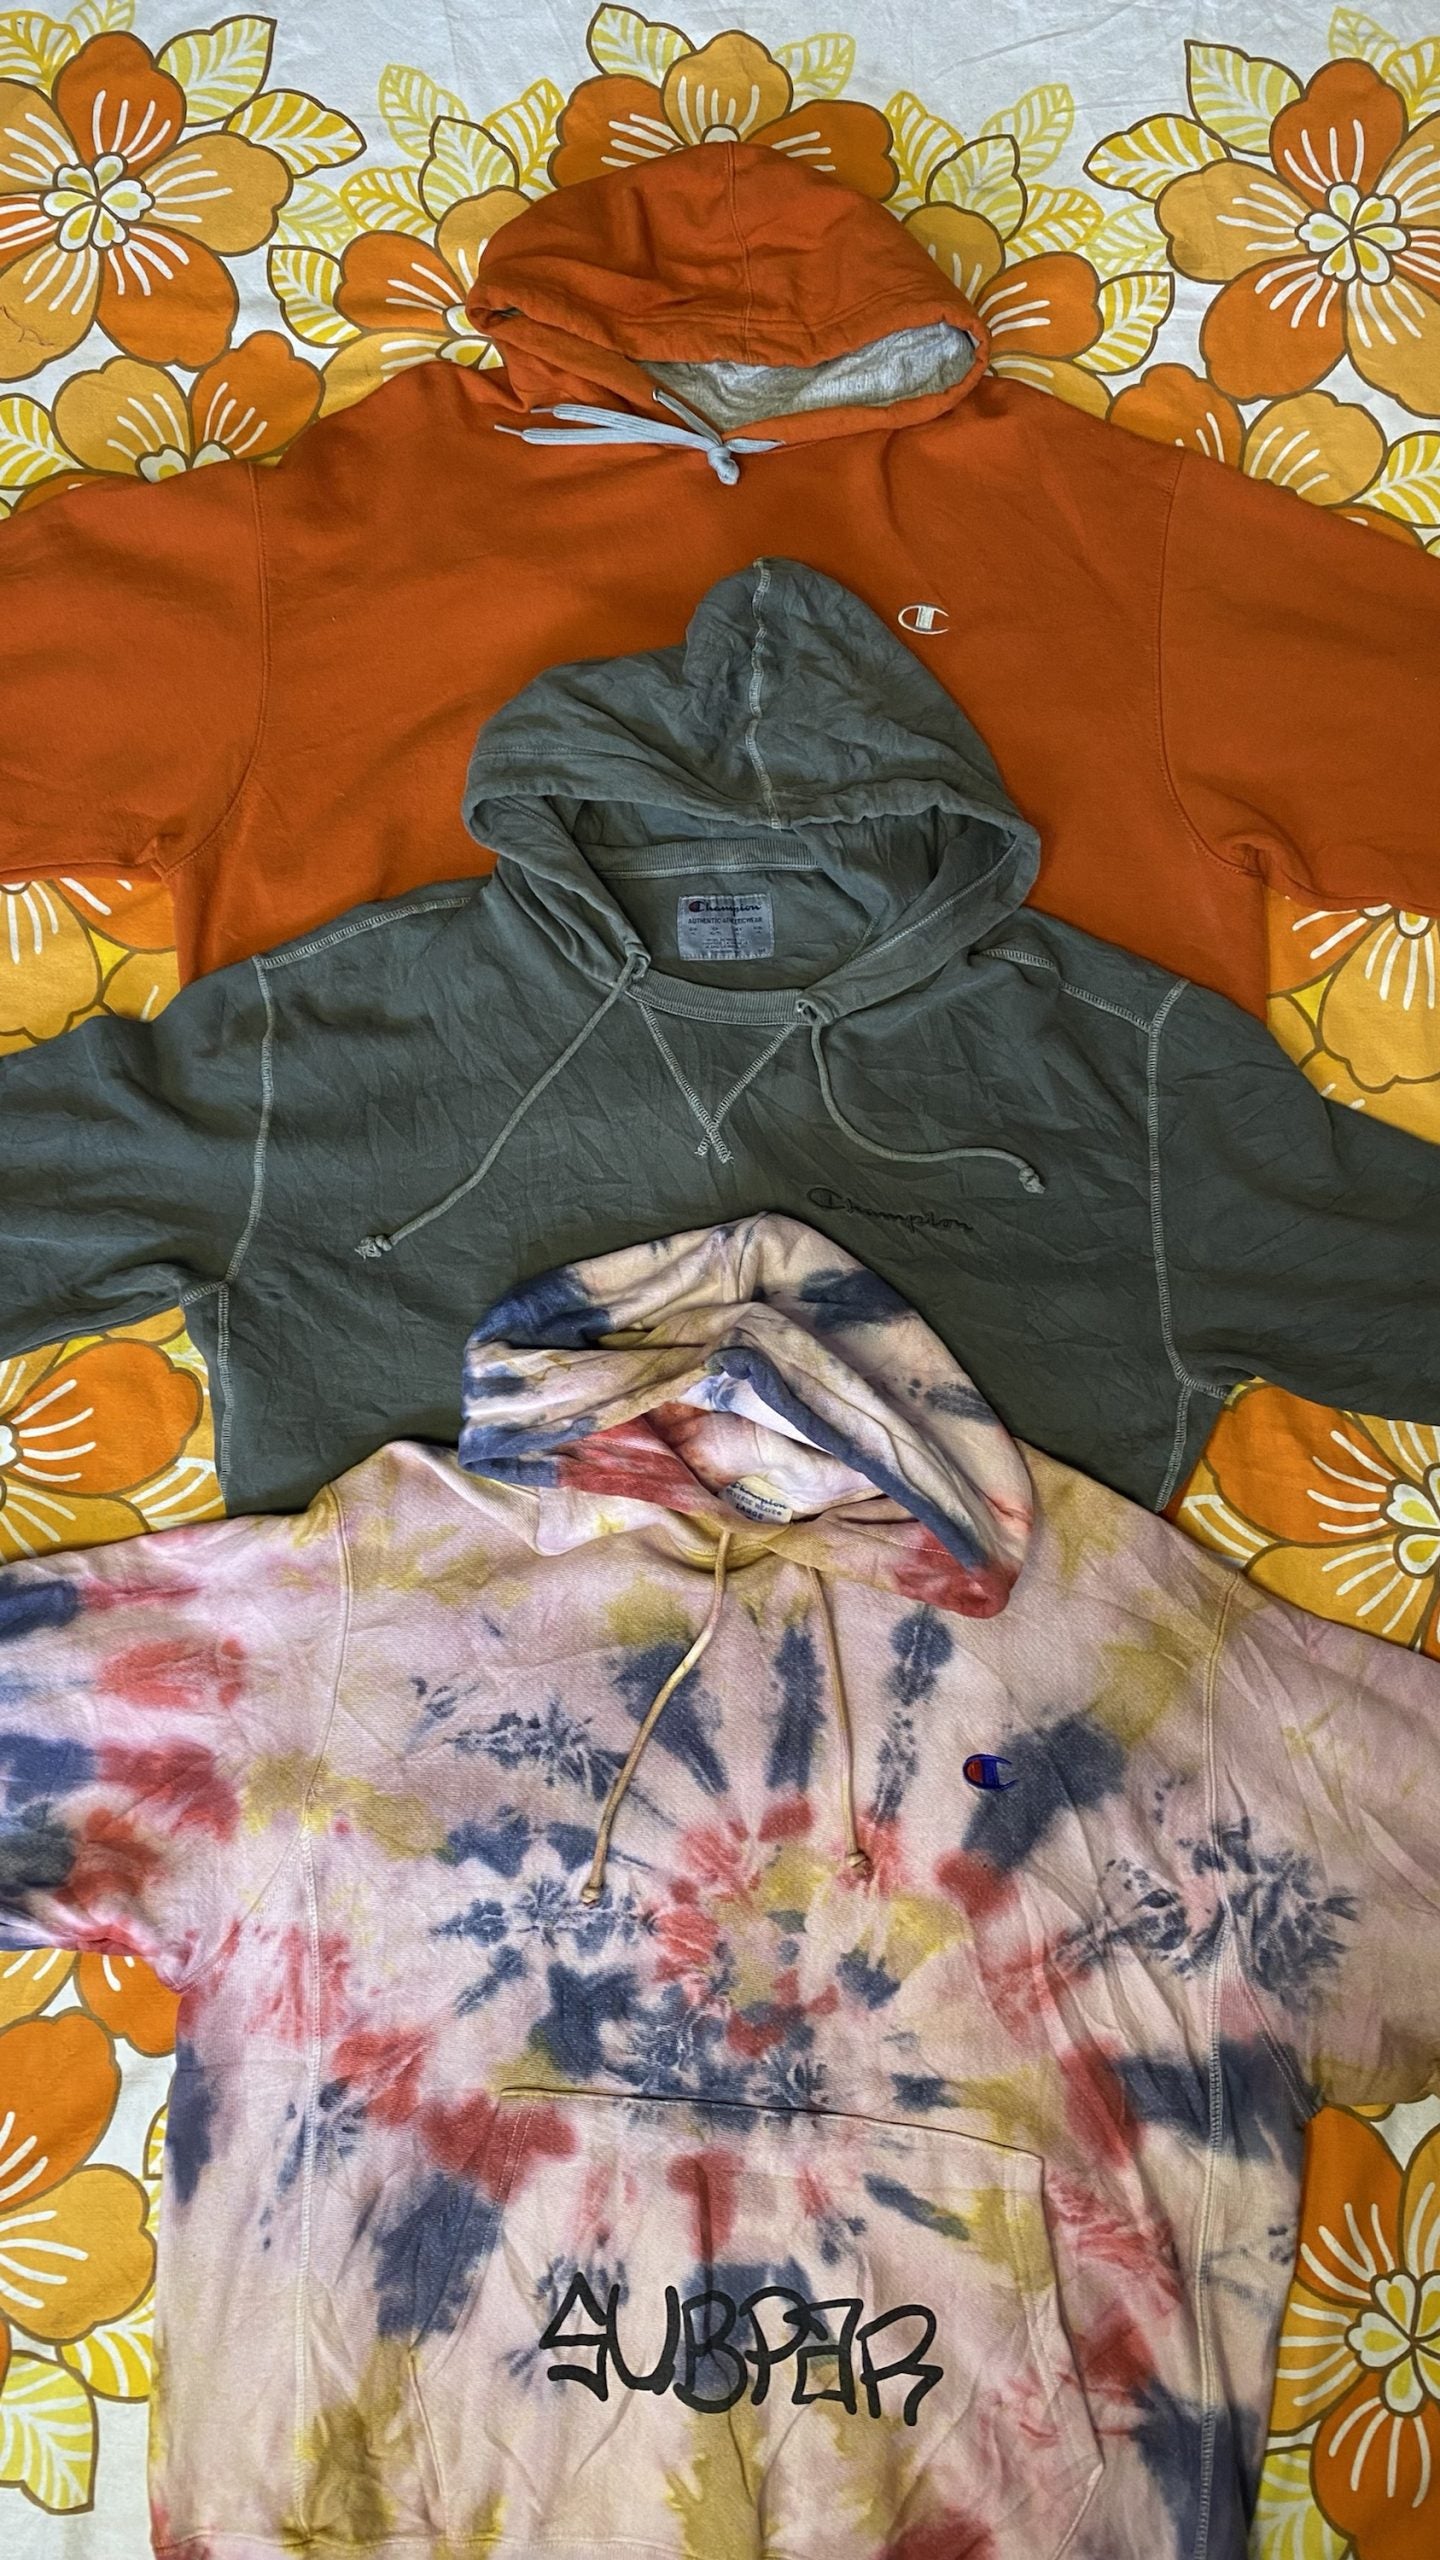 Wholesale print branded and sports hoodies and sweatshirts. Shop wholesale vintage and secondhand clothing bales and bundles online from Brighton's biggest vintage retailer. International shipping available. Book to handpick vintage from our warehouse in Sussex, UK or via video call online.